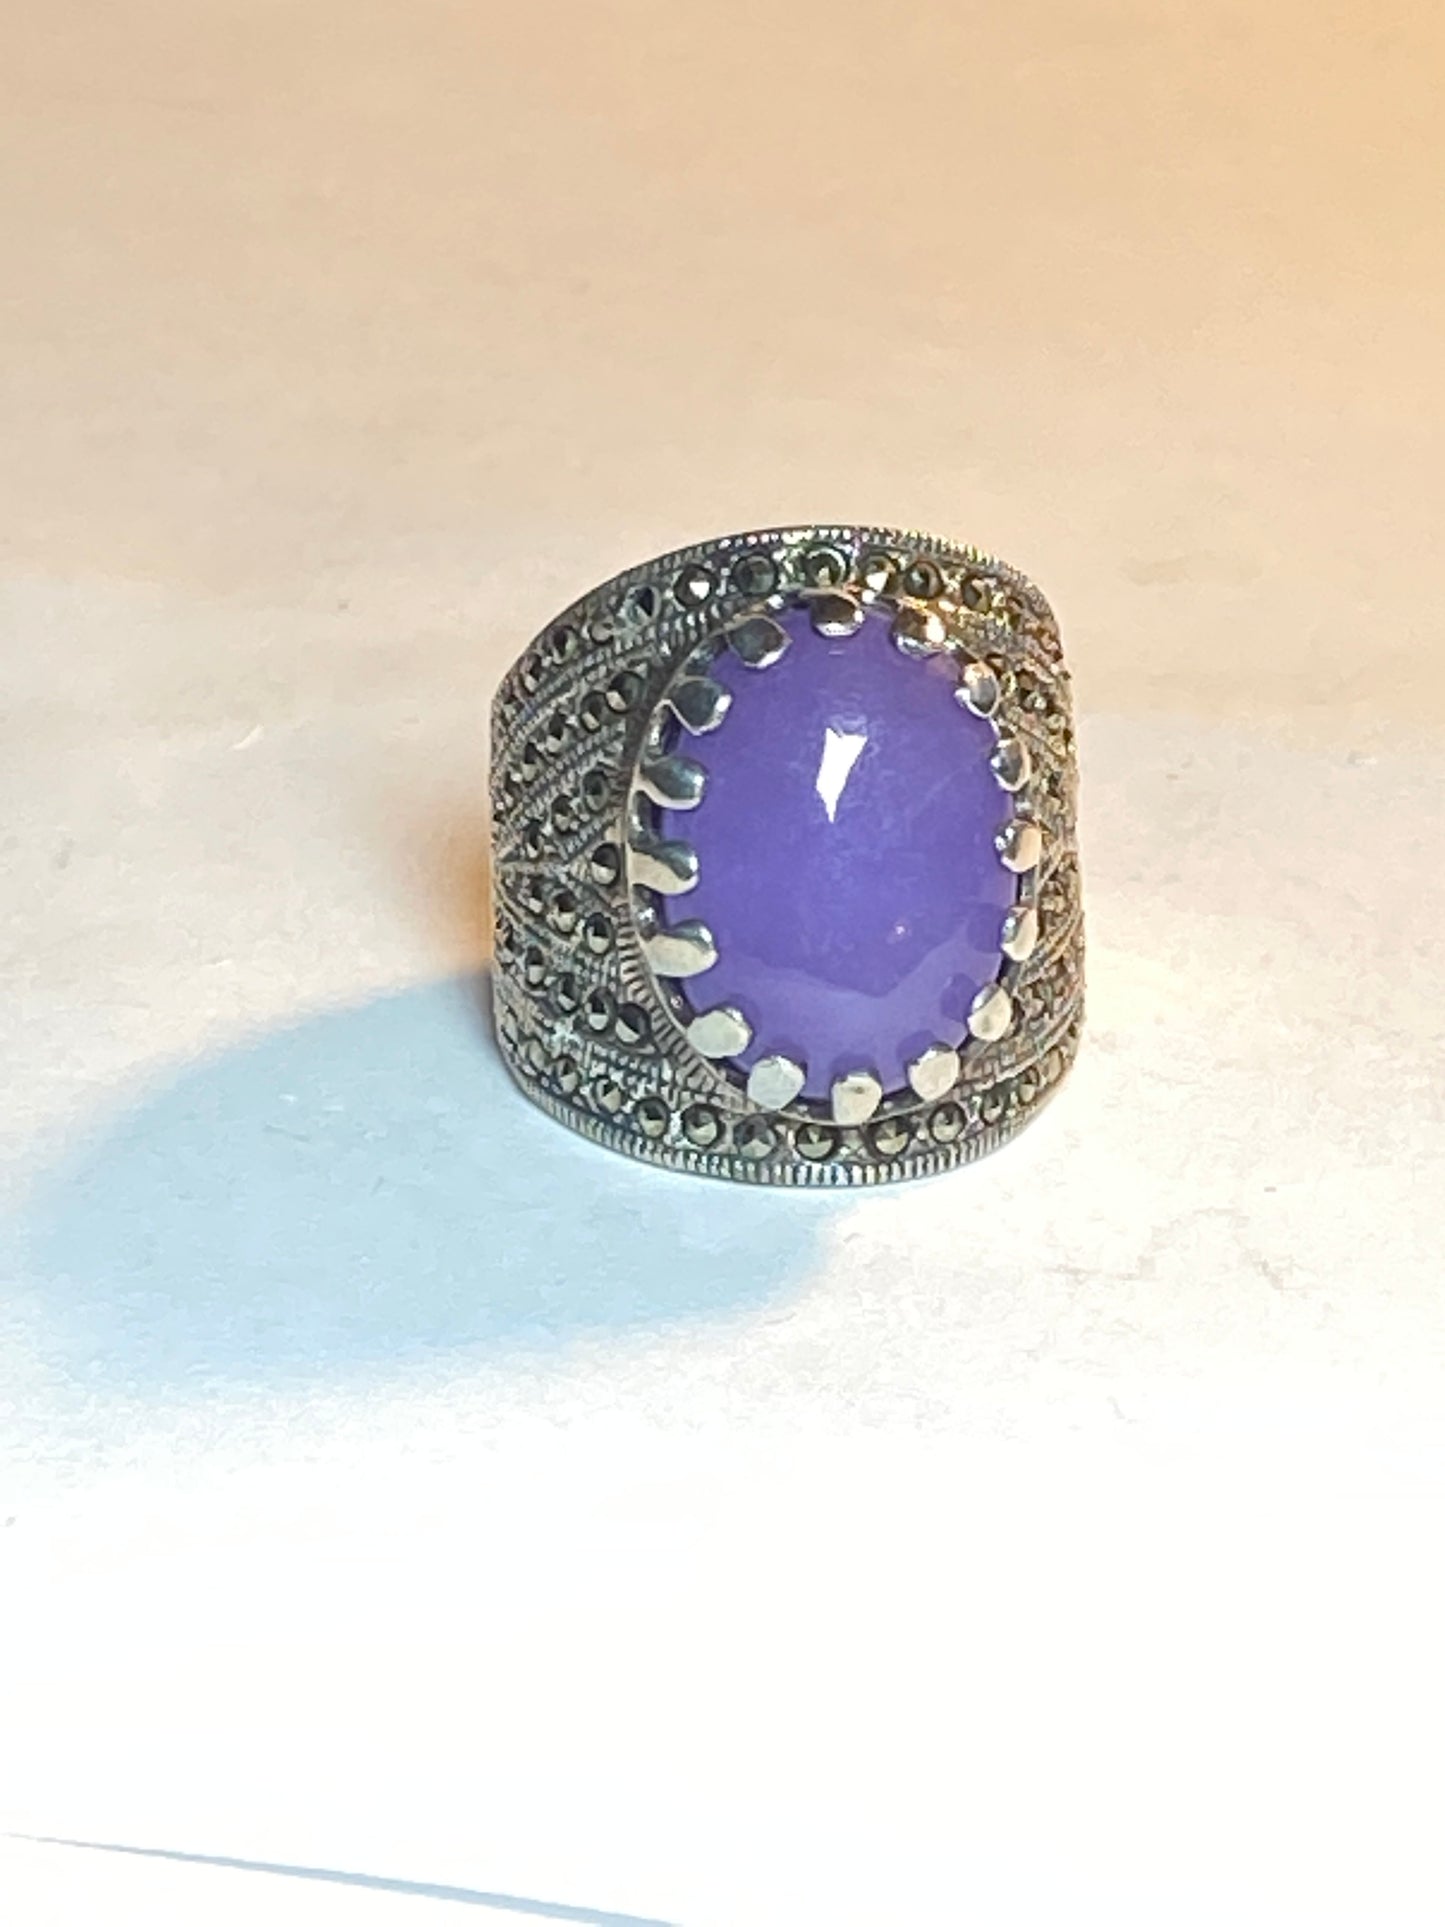 Lavender ring marcasite cigar band chunky sterling silver women girls